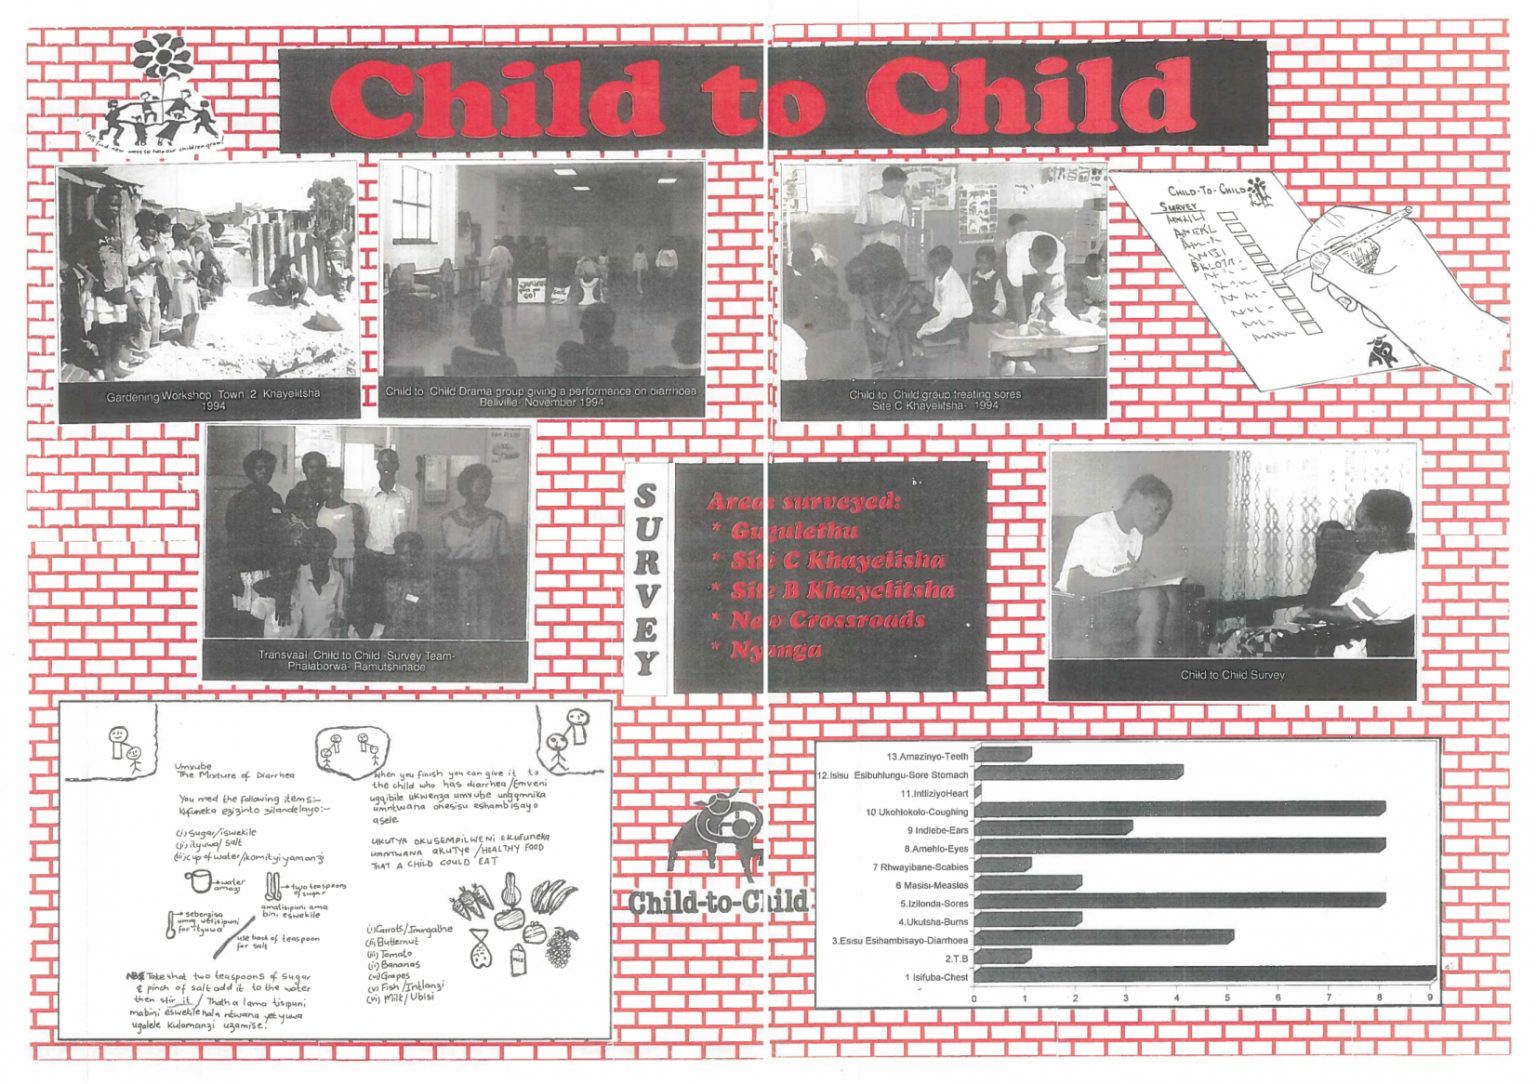 Article on the Child to Child Program from Voice of the Children newsletter, June 1994.